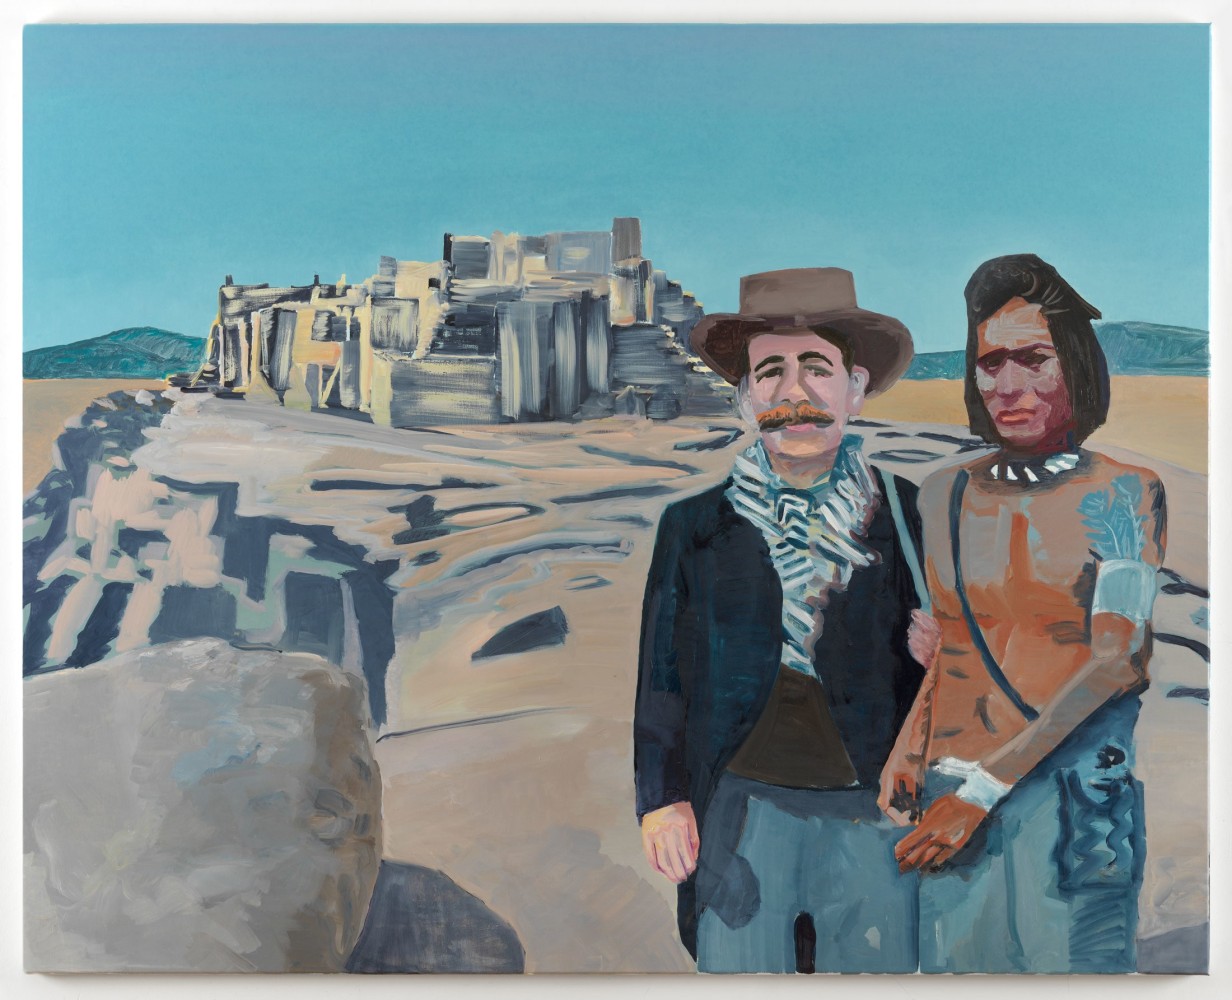 Emo Verkerk
Unknown Hopi and Aby Warburg at Walpi, 2020
Oil on linen
47 1/4 x 59 1/8 inches
(120 x 150 cm)